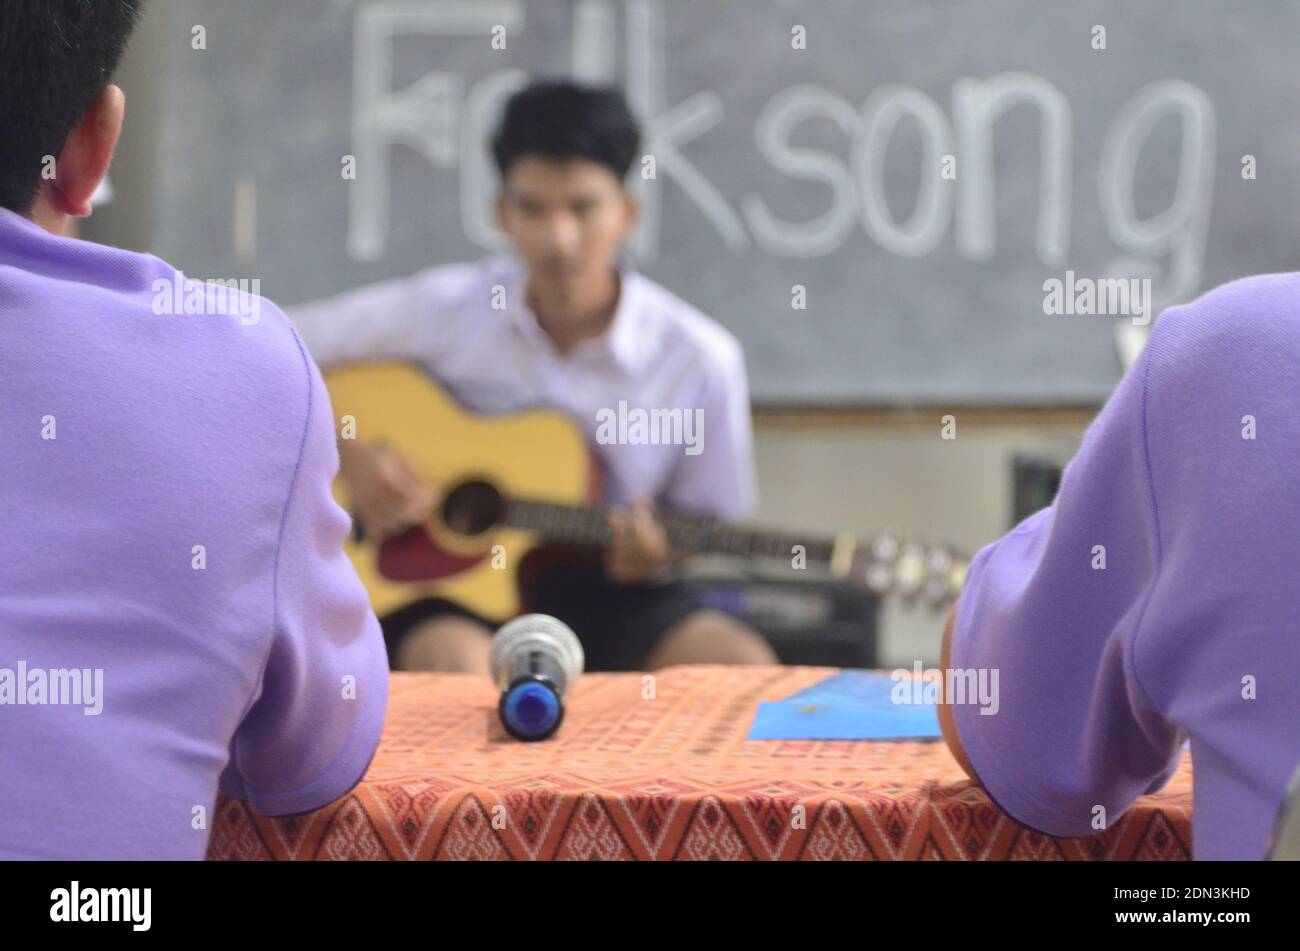 Rear View Of Judges Listening To Male Contestant Playing Guitar During Competition Stock Photo